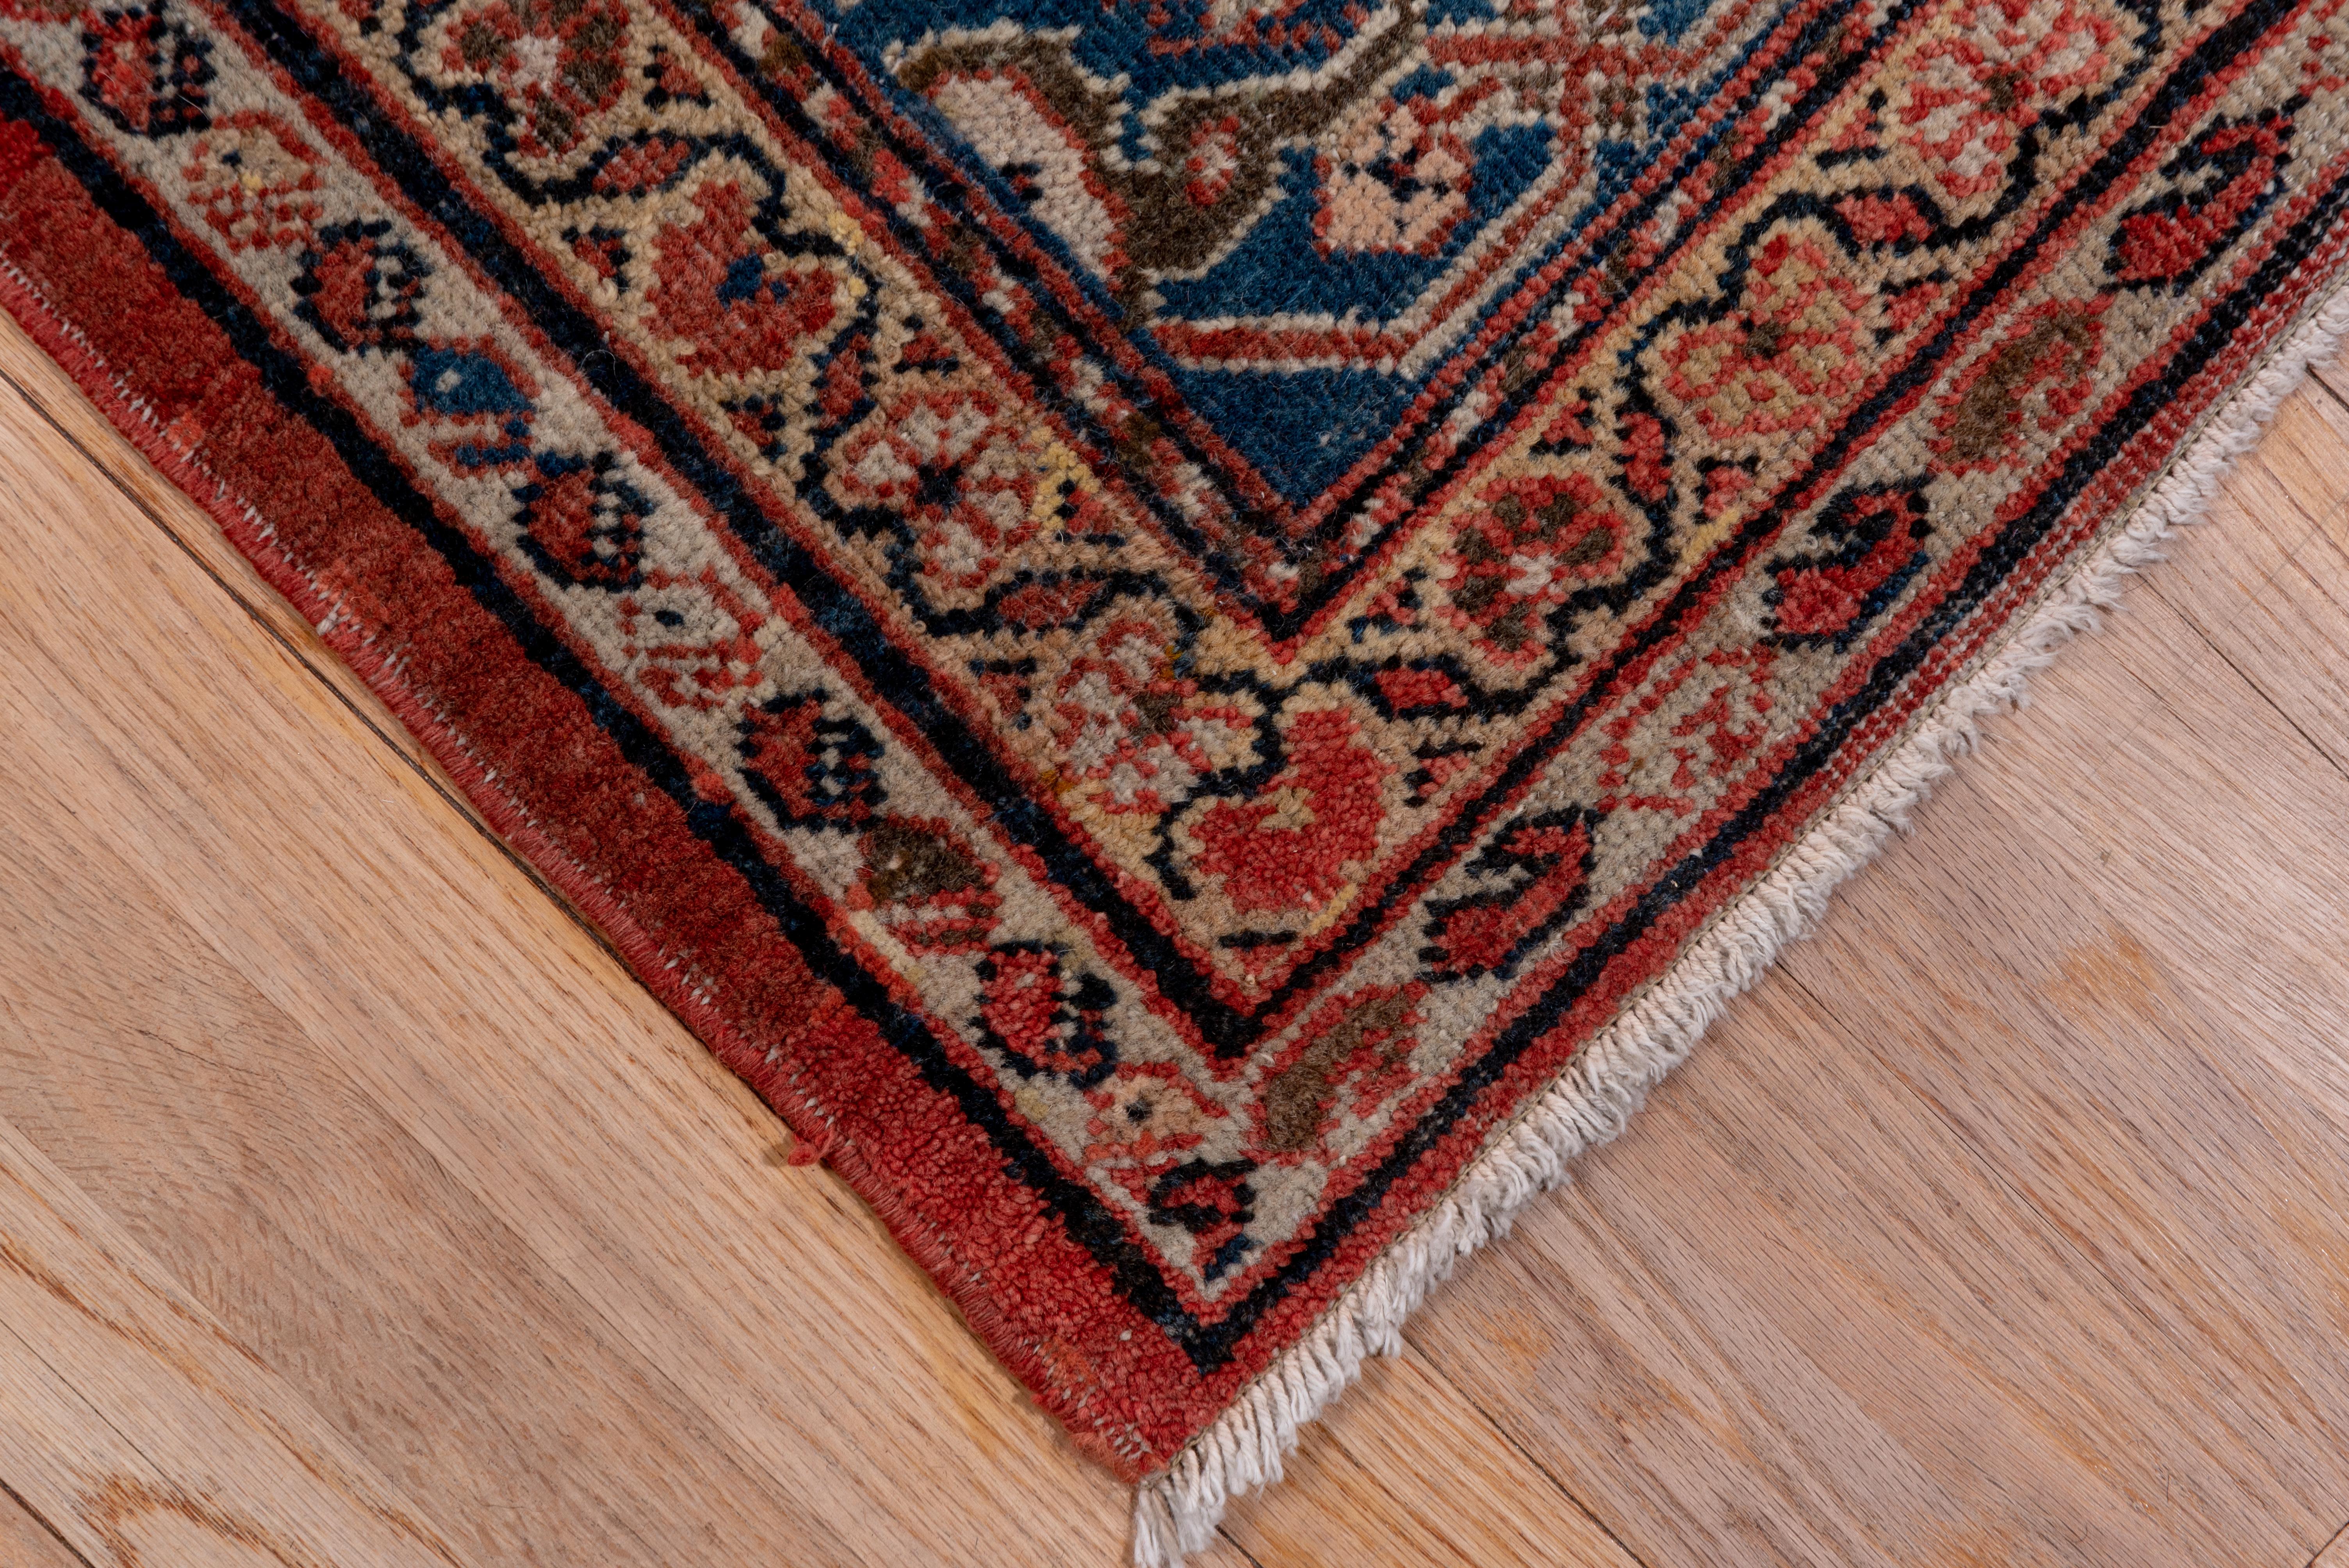 This good condition west Persian village carpet shows a large-scale all-over pattern of straw and ivory vertical lozenges and horizontal cartouches, all with complex rosette and leaf patterns. The ground is a soft, lightly abrashed madder red. The